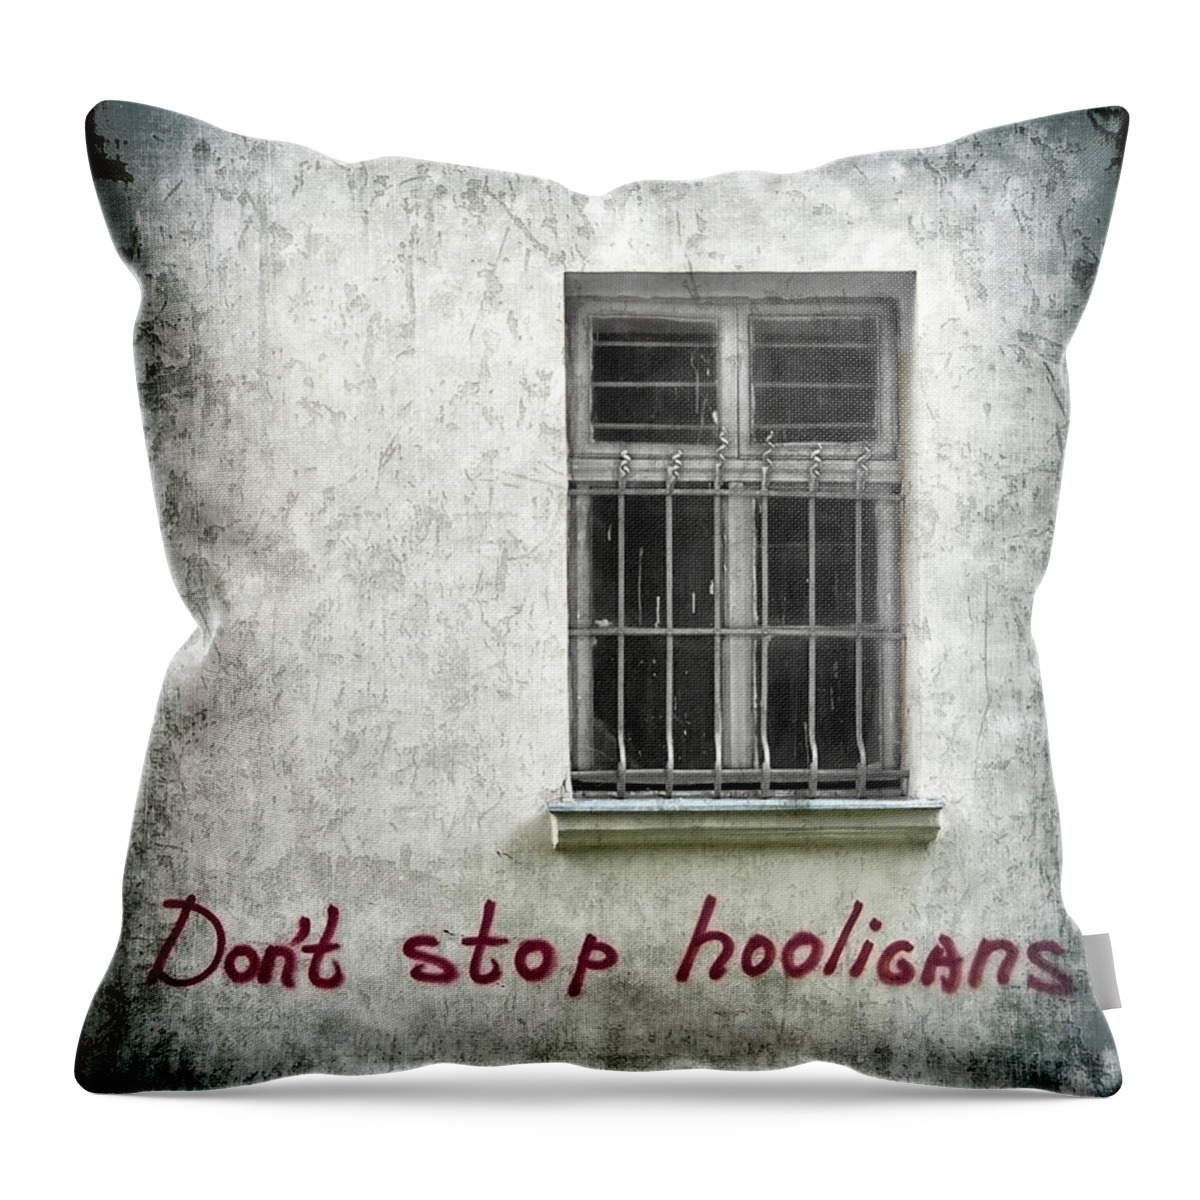 Ukraine Throw Pillow featuring the photograph Don't Stop Hooligans by Evelina Kremsdorf